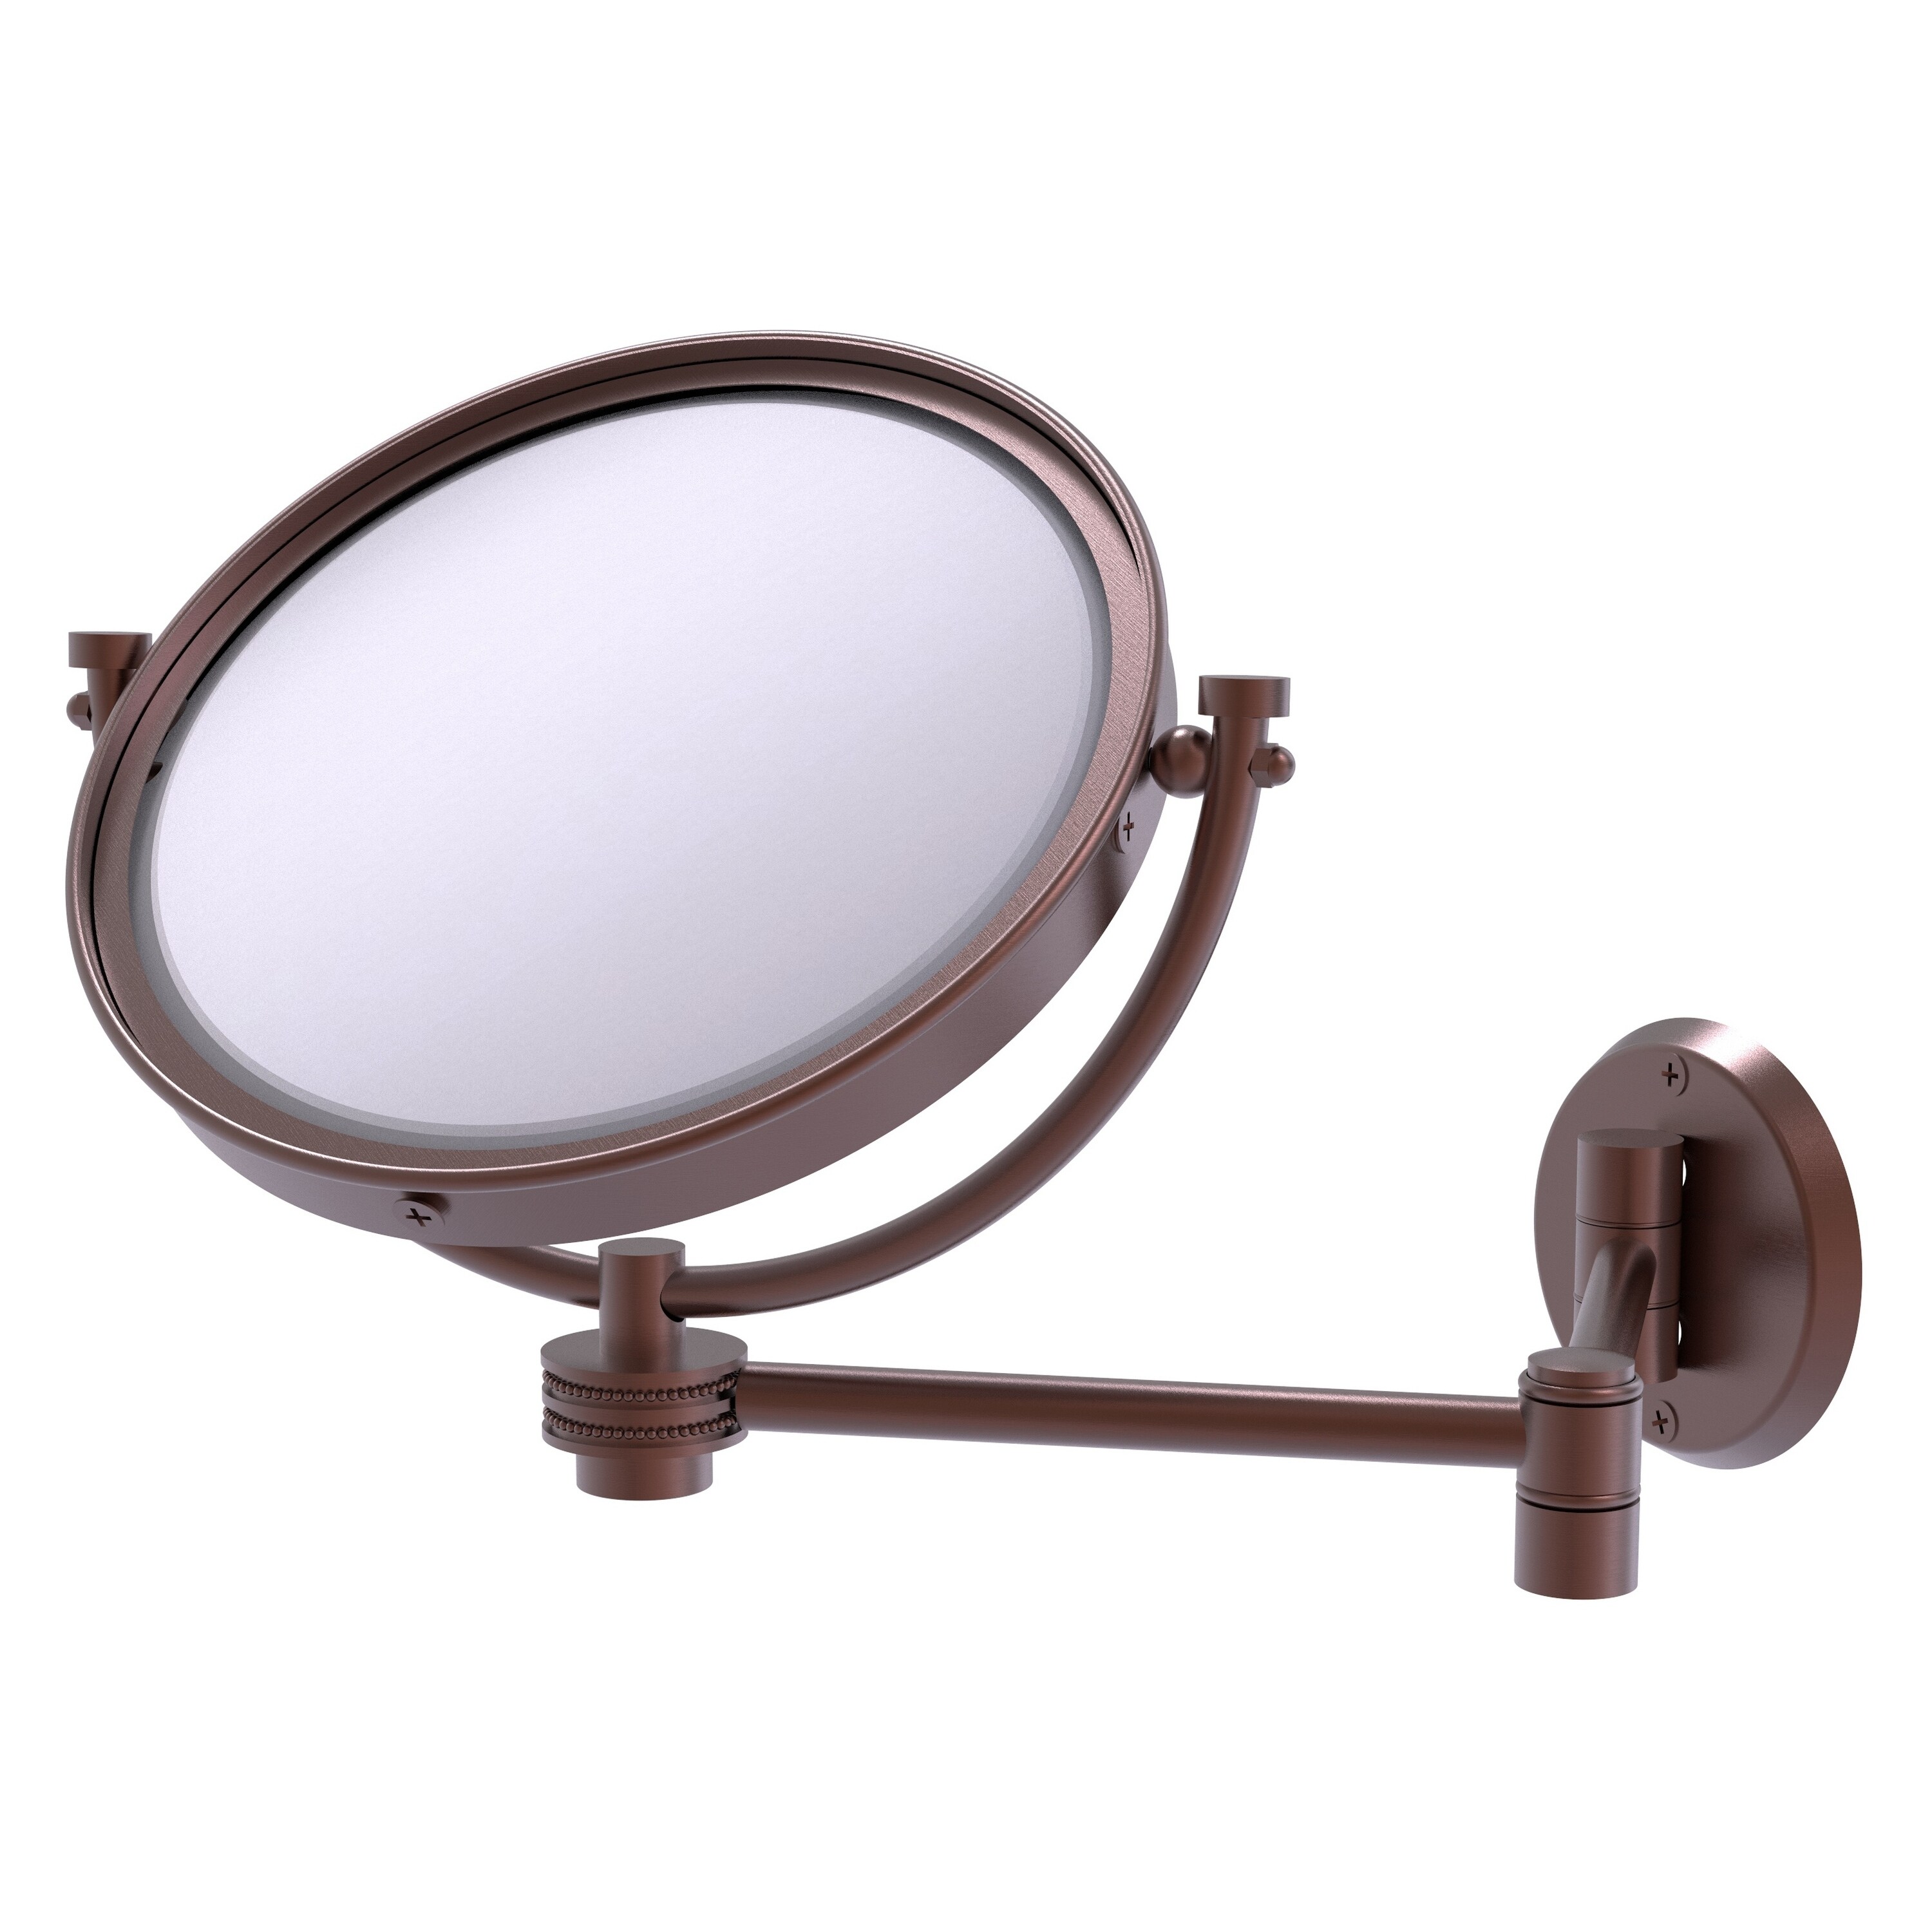 8-in x 10-in Antique Copper Double-sided 5X Magnifying Wall-mounted Vanity Mirror | - Allied Brass WM-6D/4X-CA